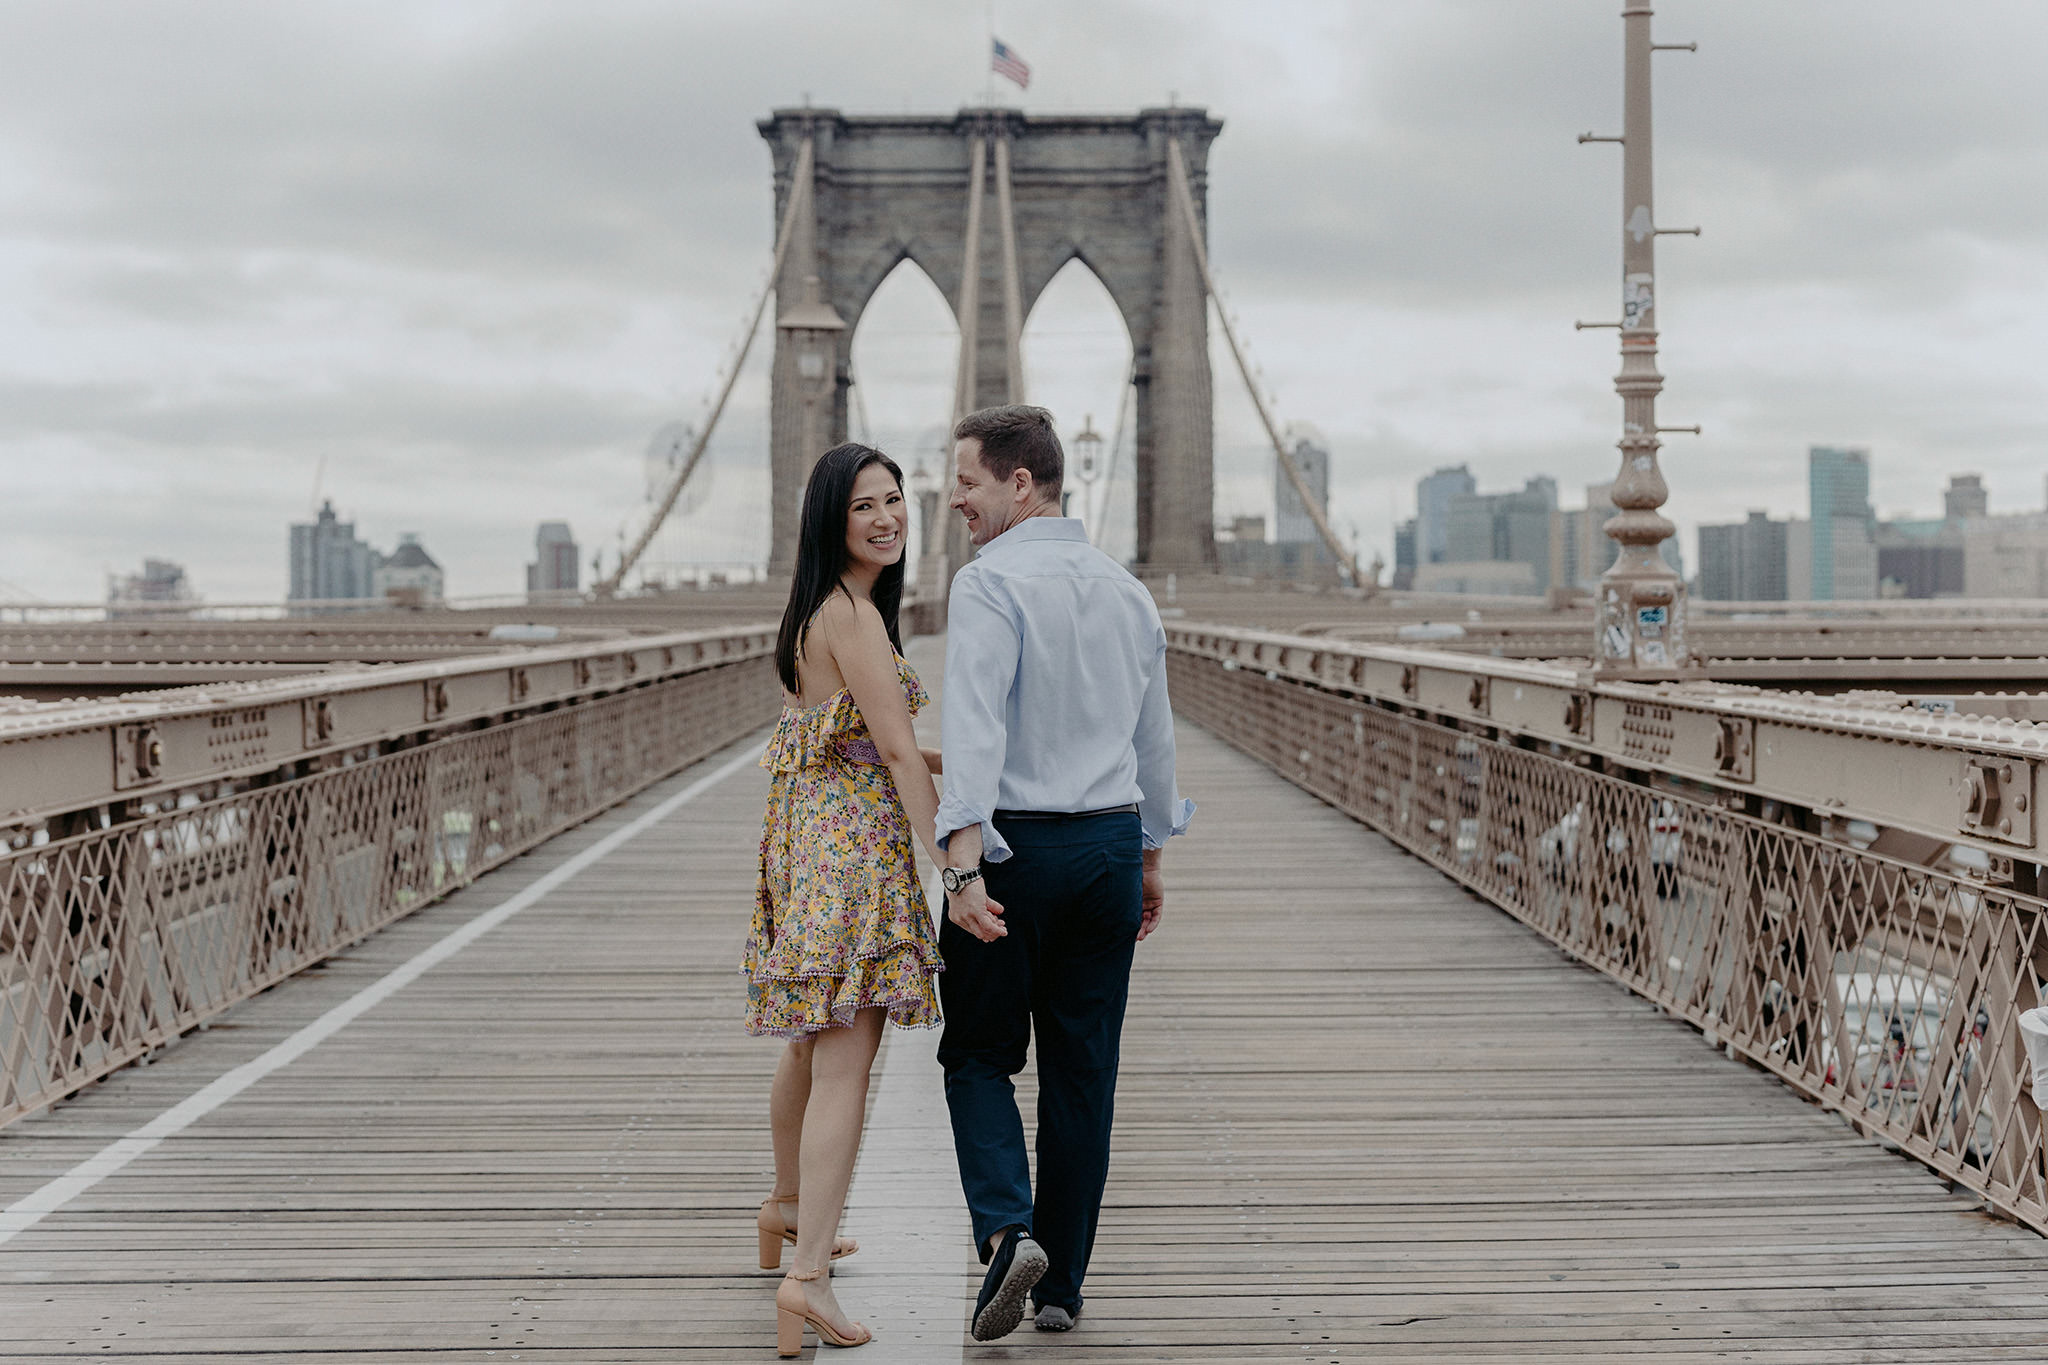 Back view of the couple happily walking in Brooklyn Bridge. Editorial NYC summer engagement photo by Jenny Fu Studio